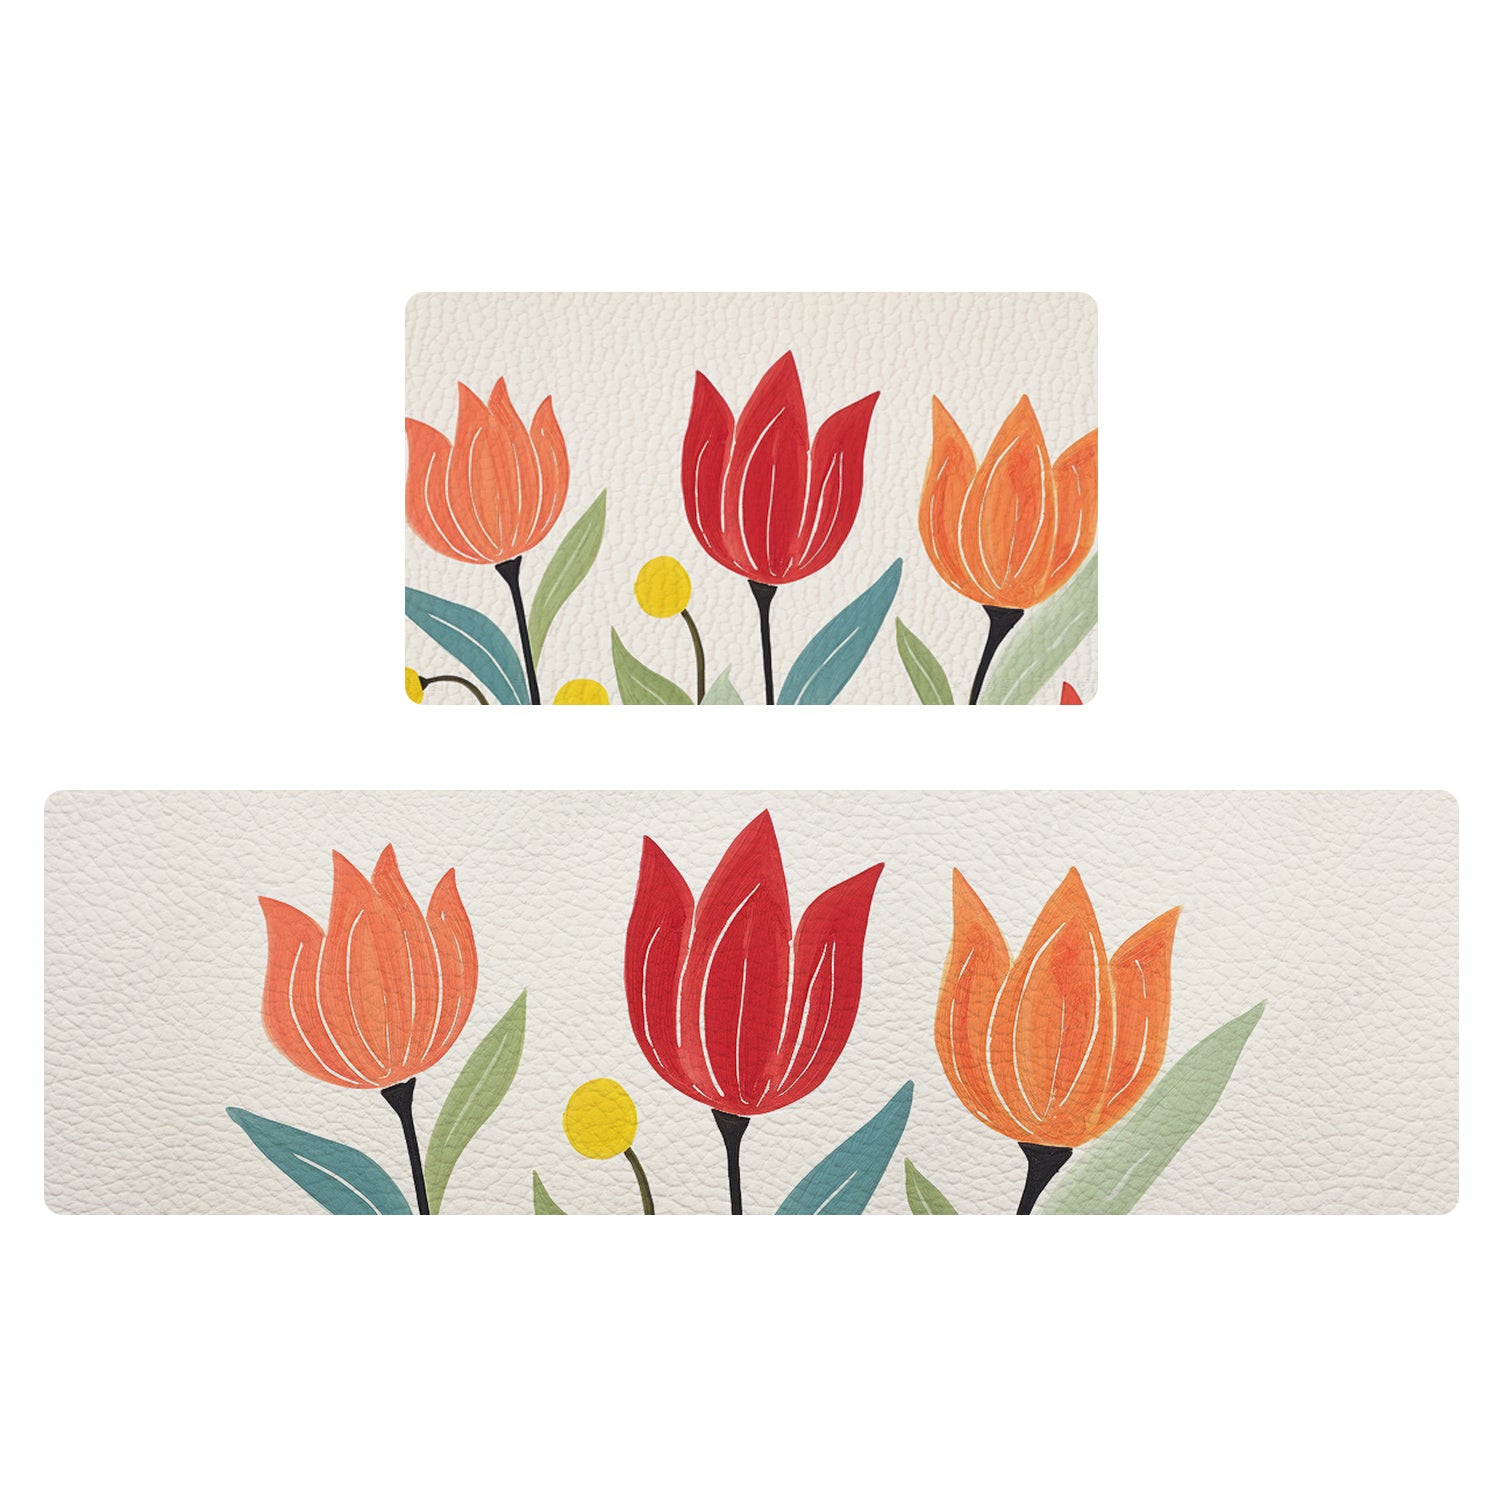 Feblilac Tulips Off-white Background PVC Leather Kitchen Mat